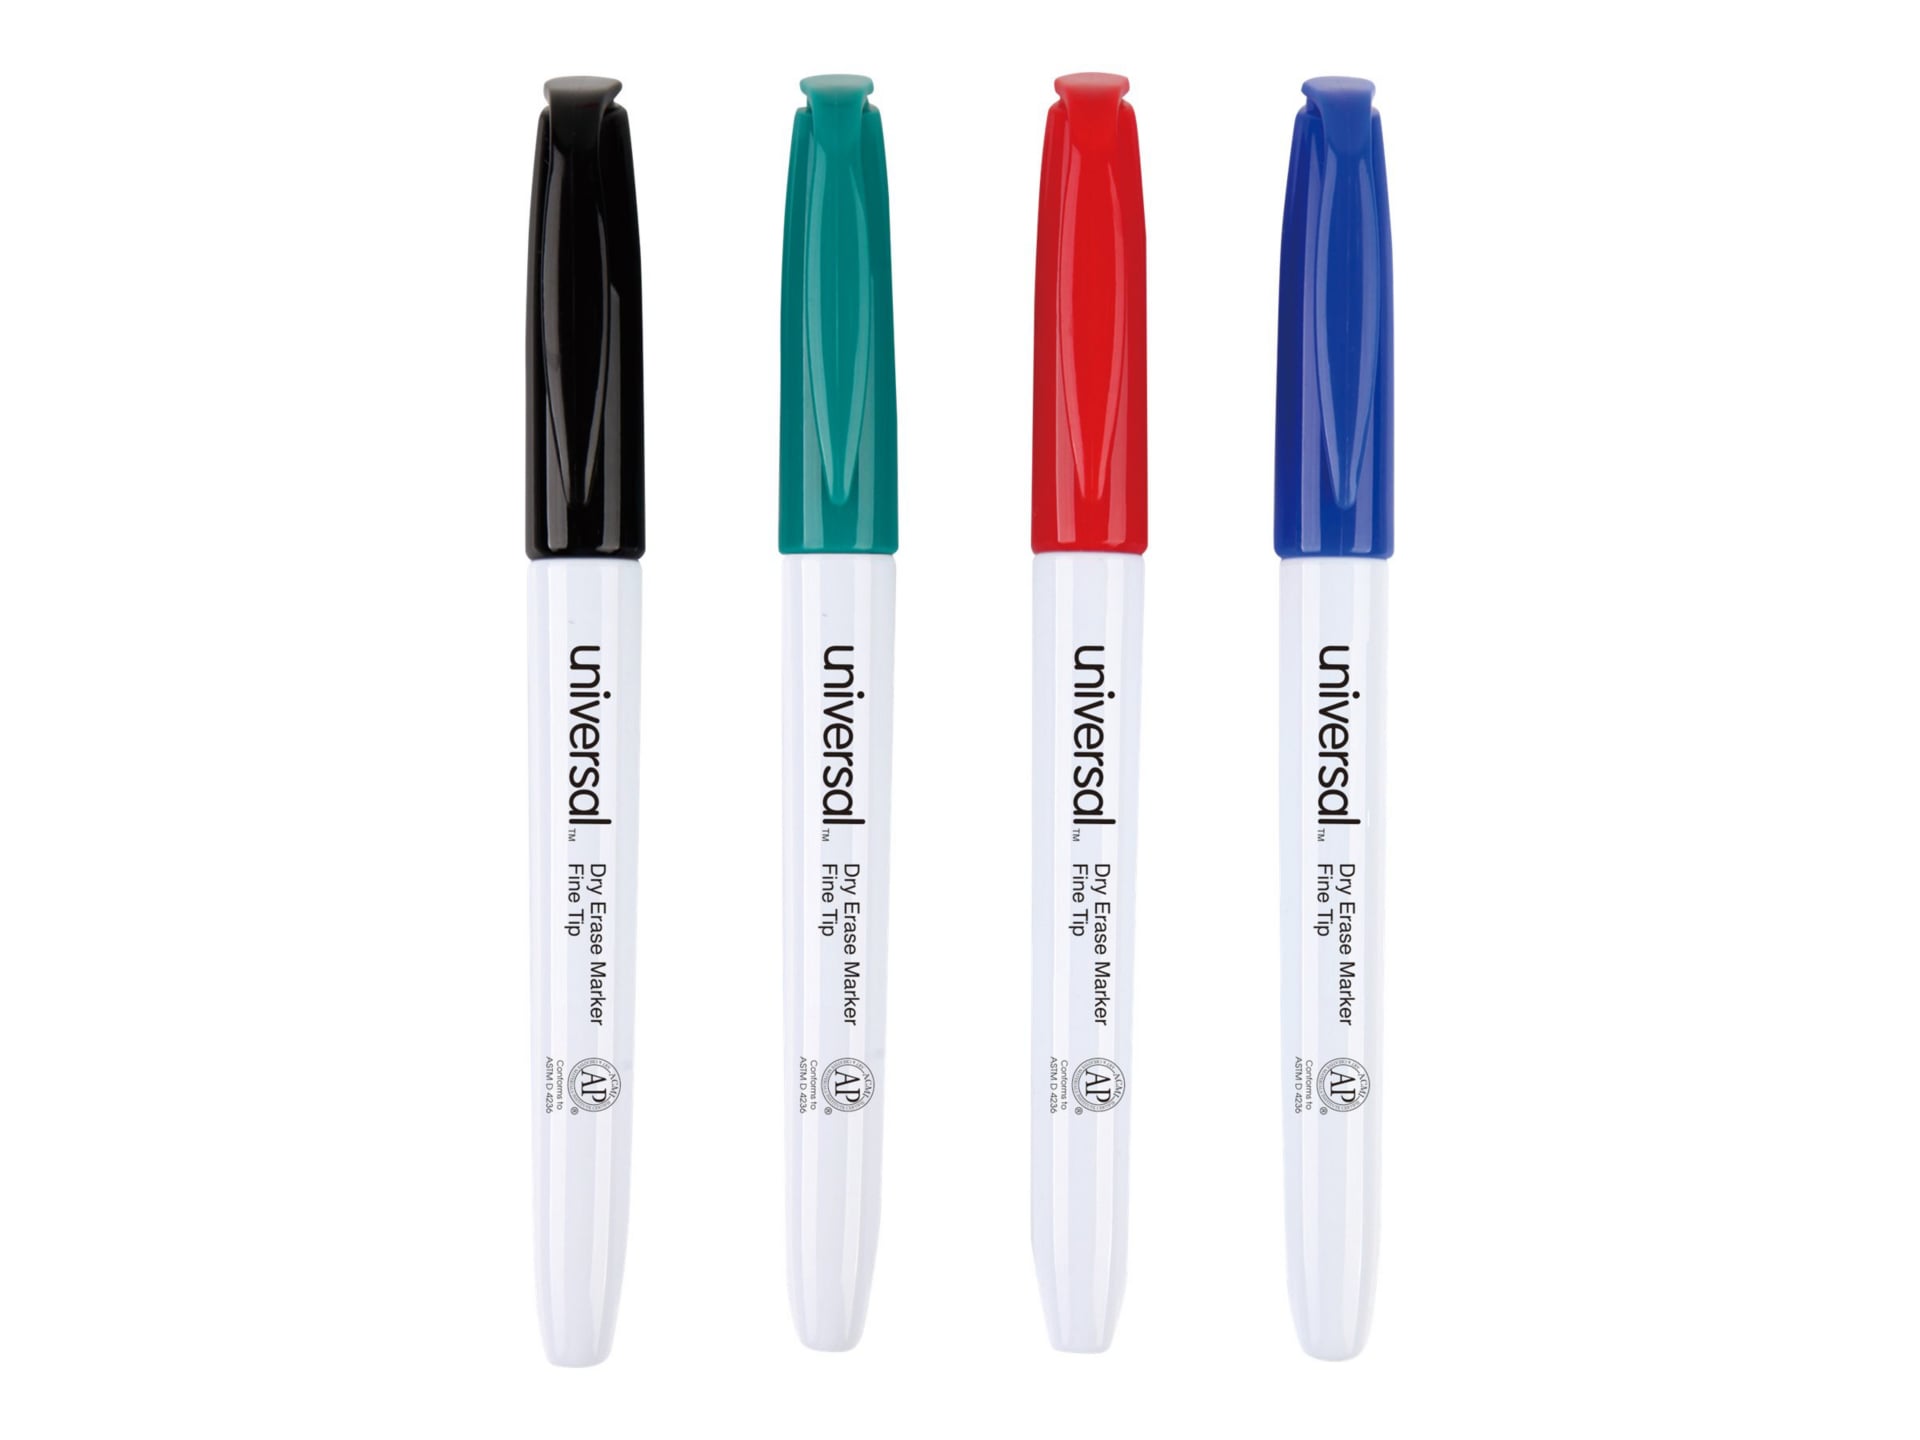 Universal - marker (pack of 4)